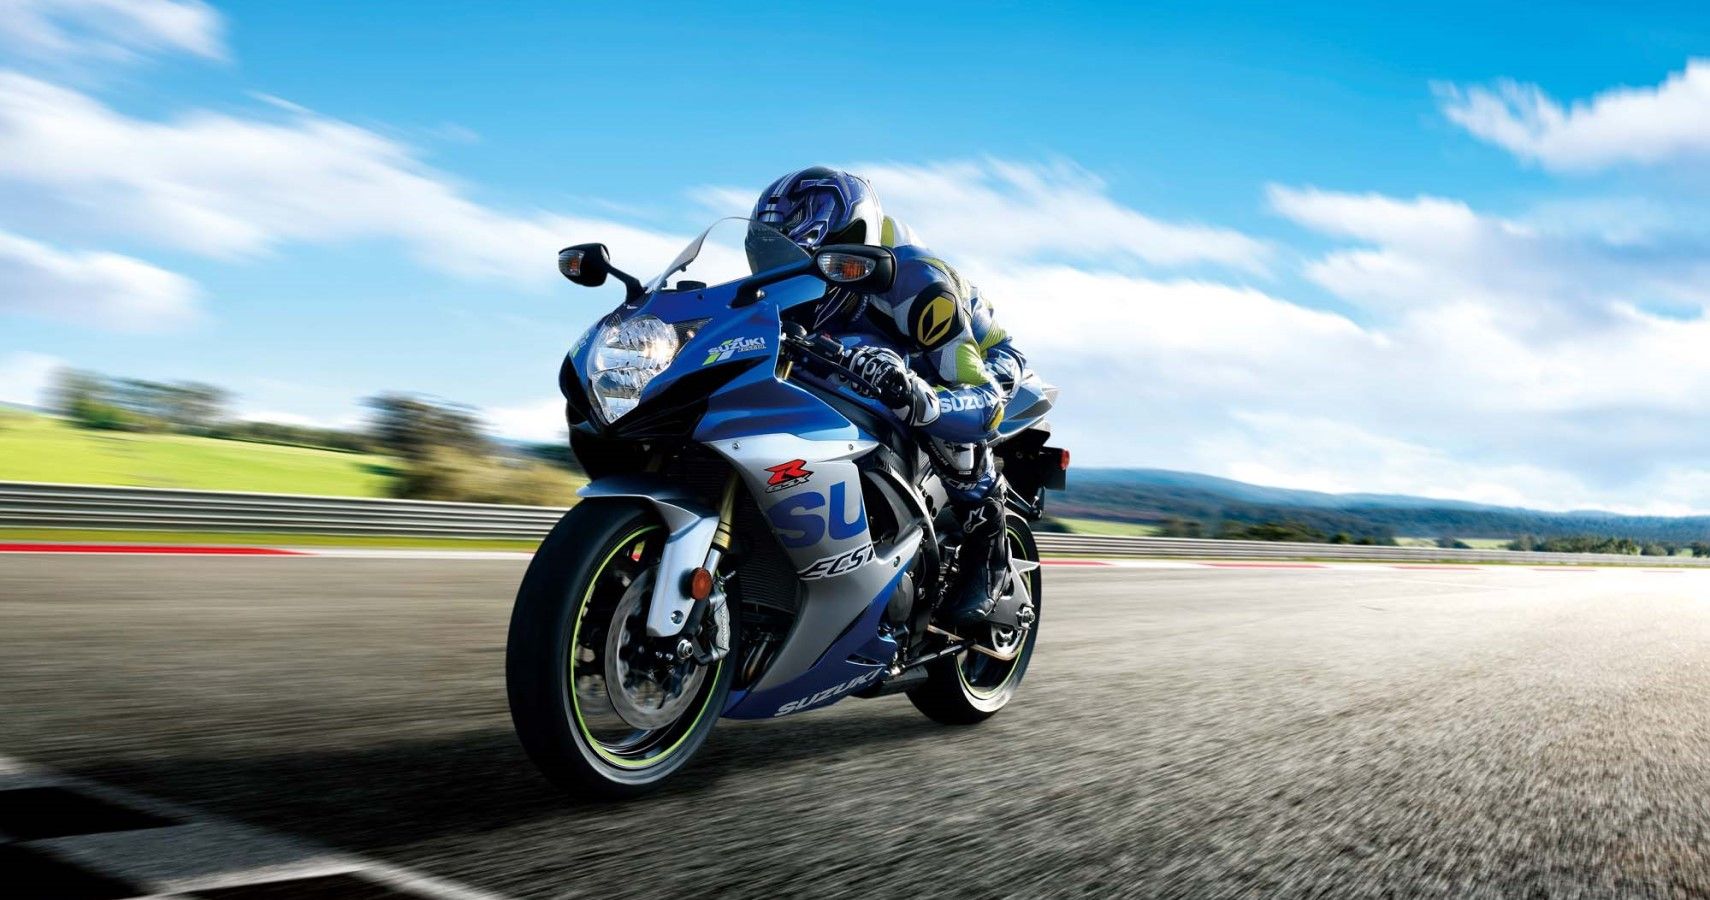 Suzuki GSX-R750 racing it out on the track